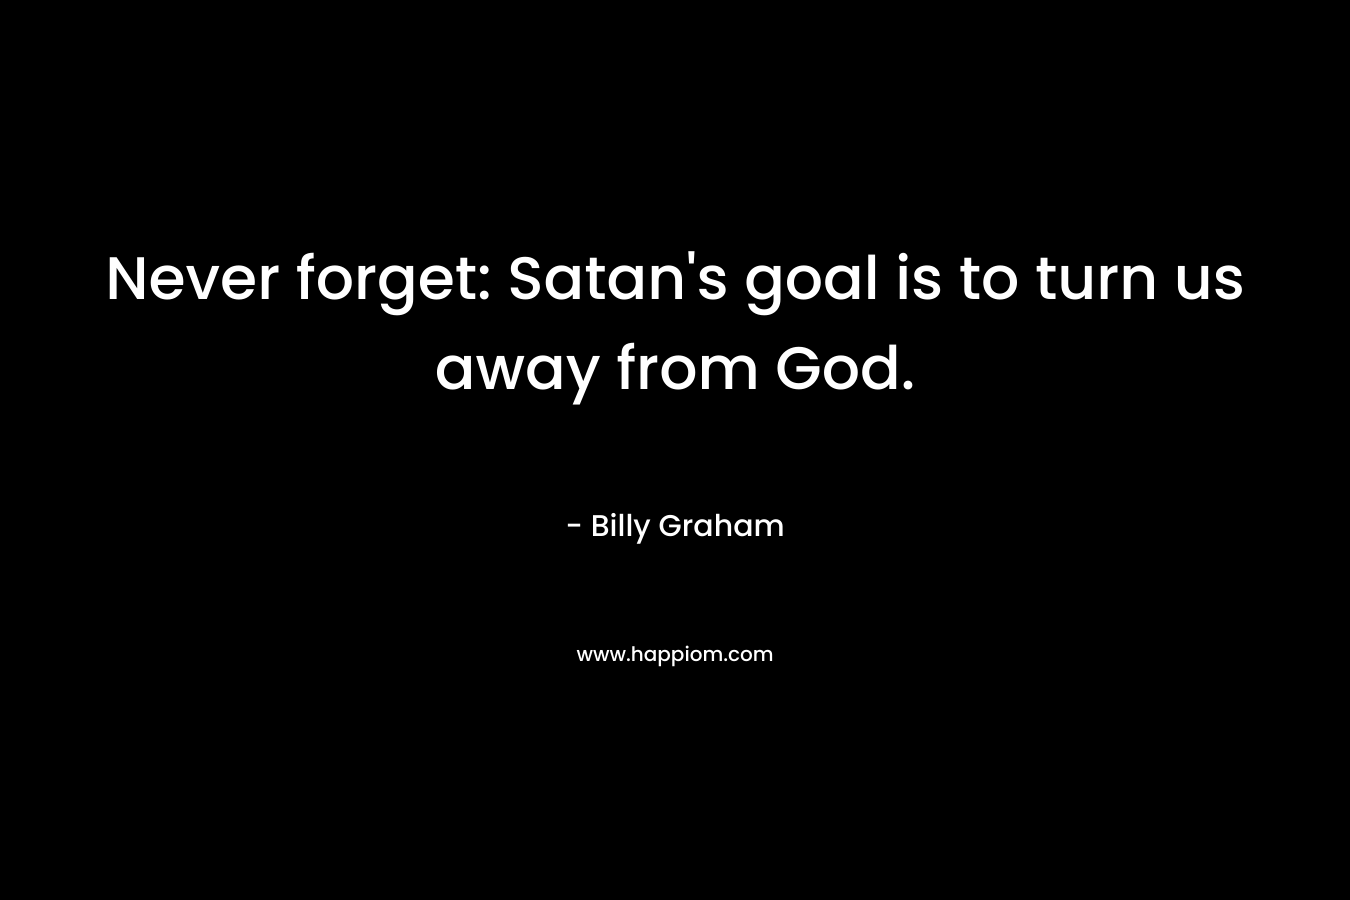 Never forget: Satan’s goal is to turn us away from God. – Billy Graham